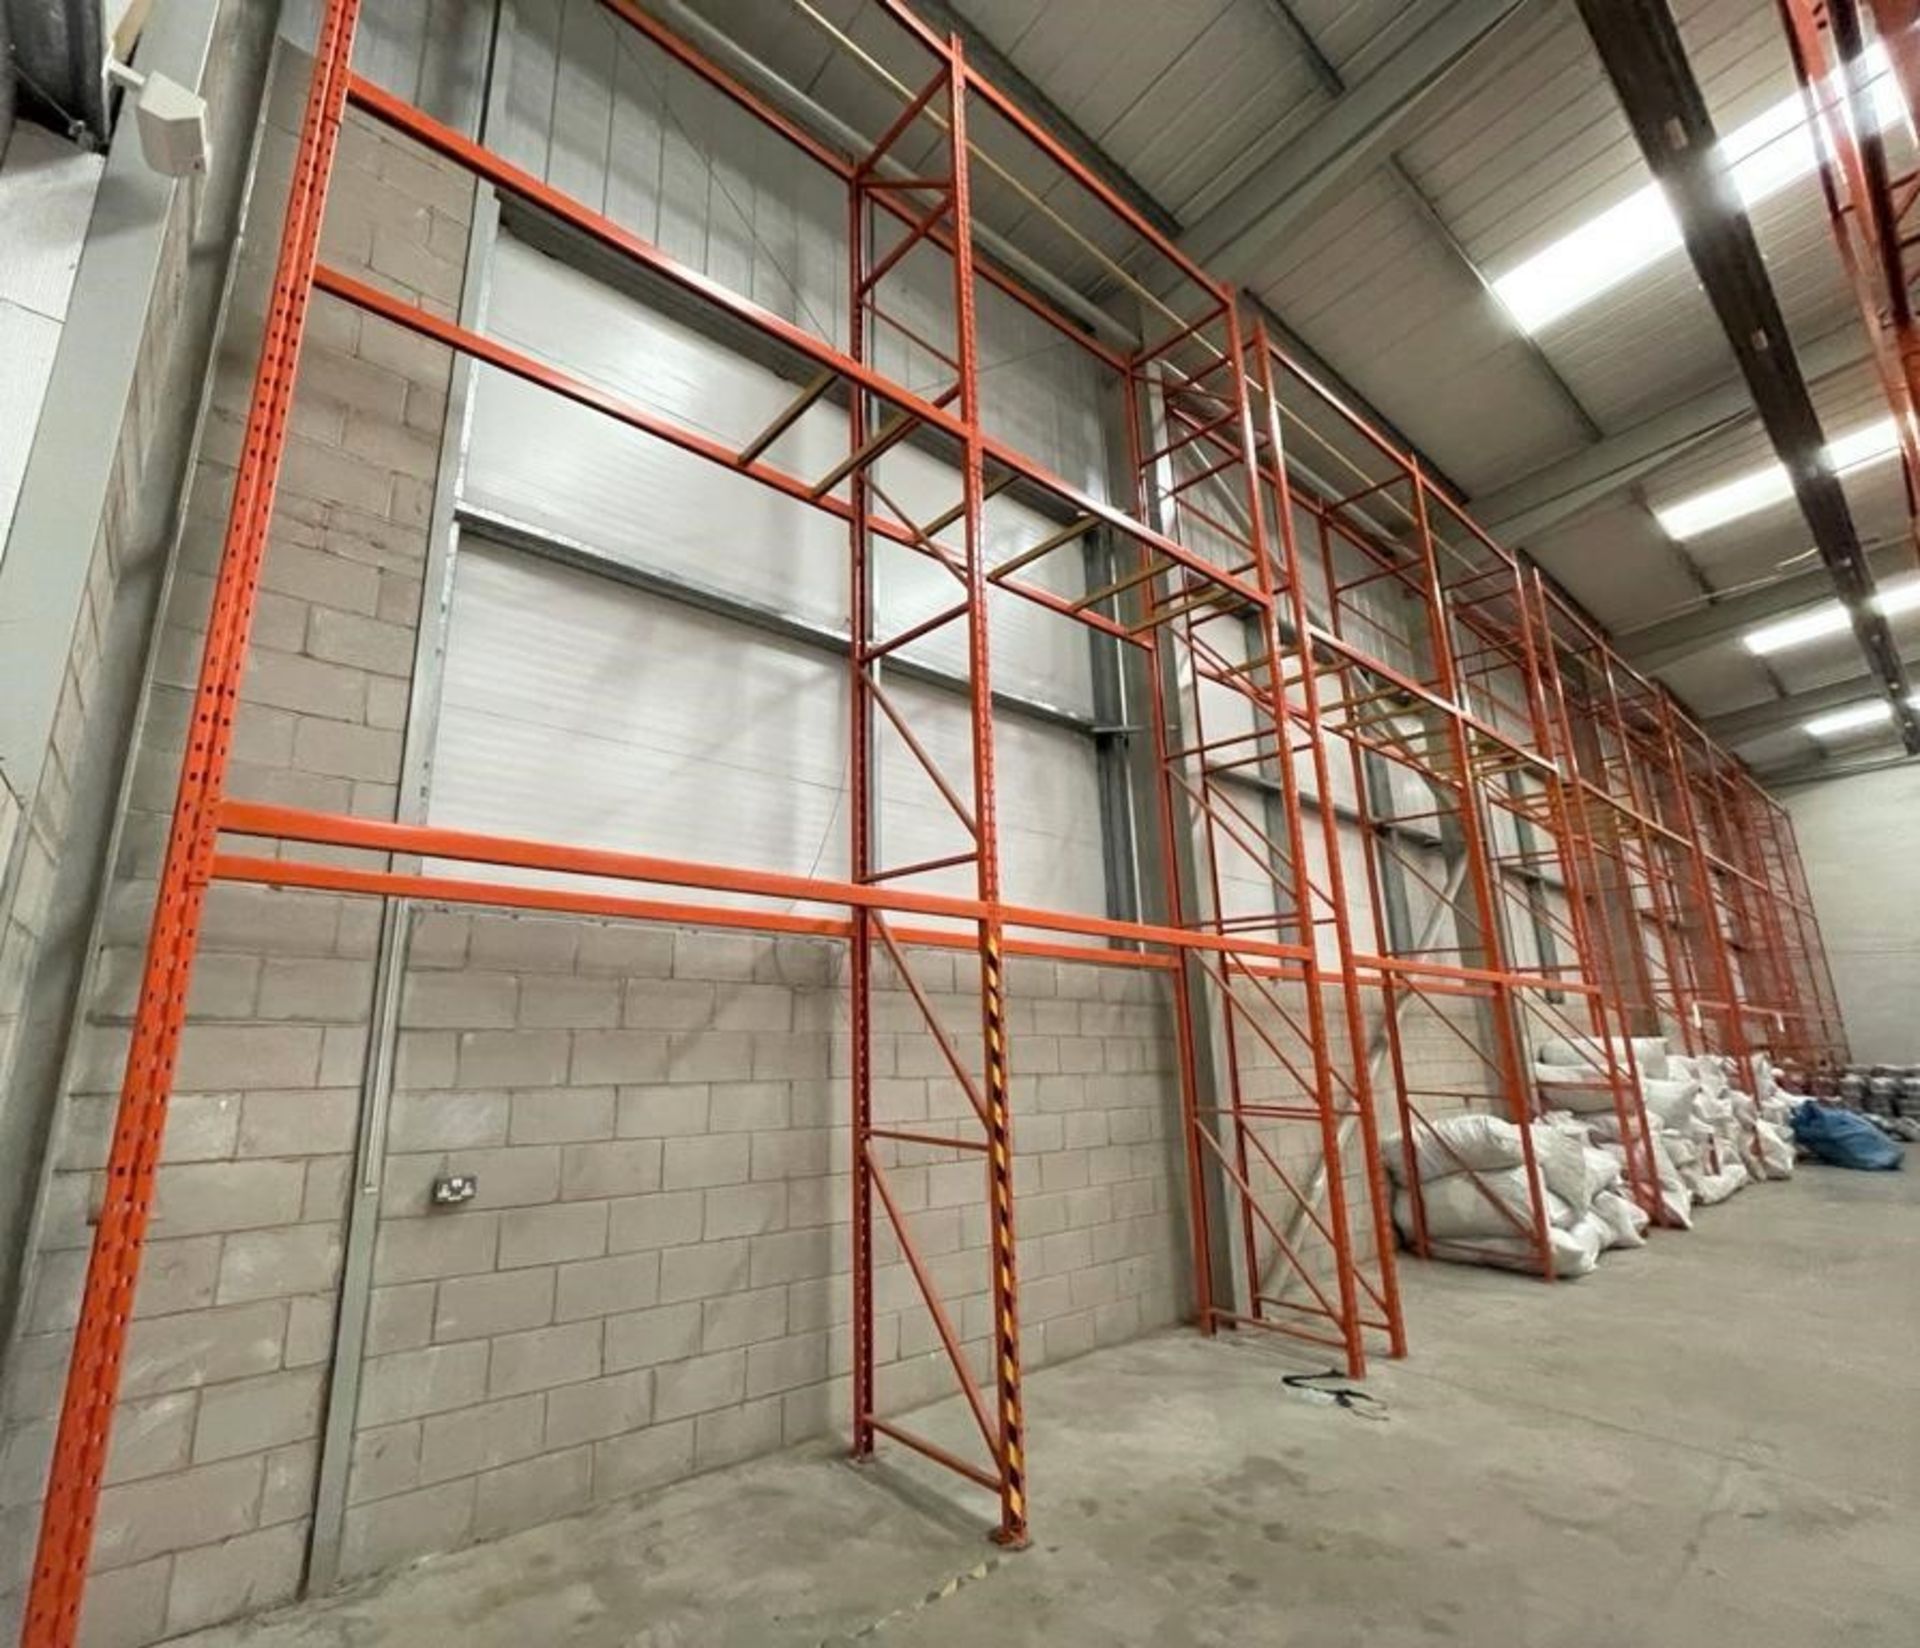 14 x Bays of RediRack Warehouse PALLET RACKING - Lot Includes 15 x Uprights and 60 x Crossbeams -